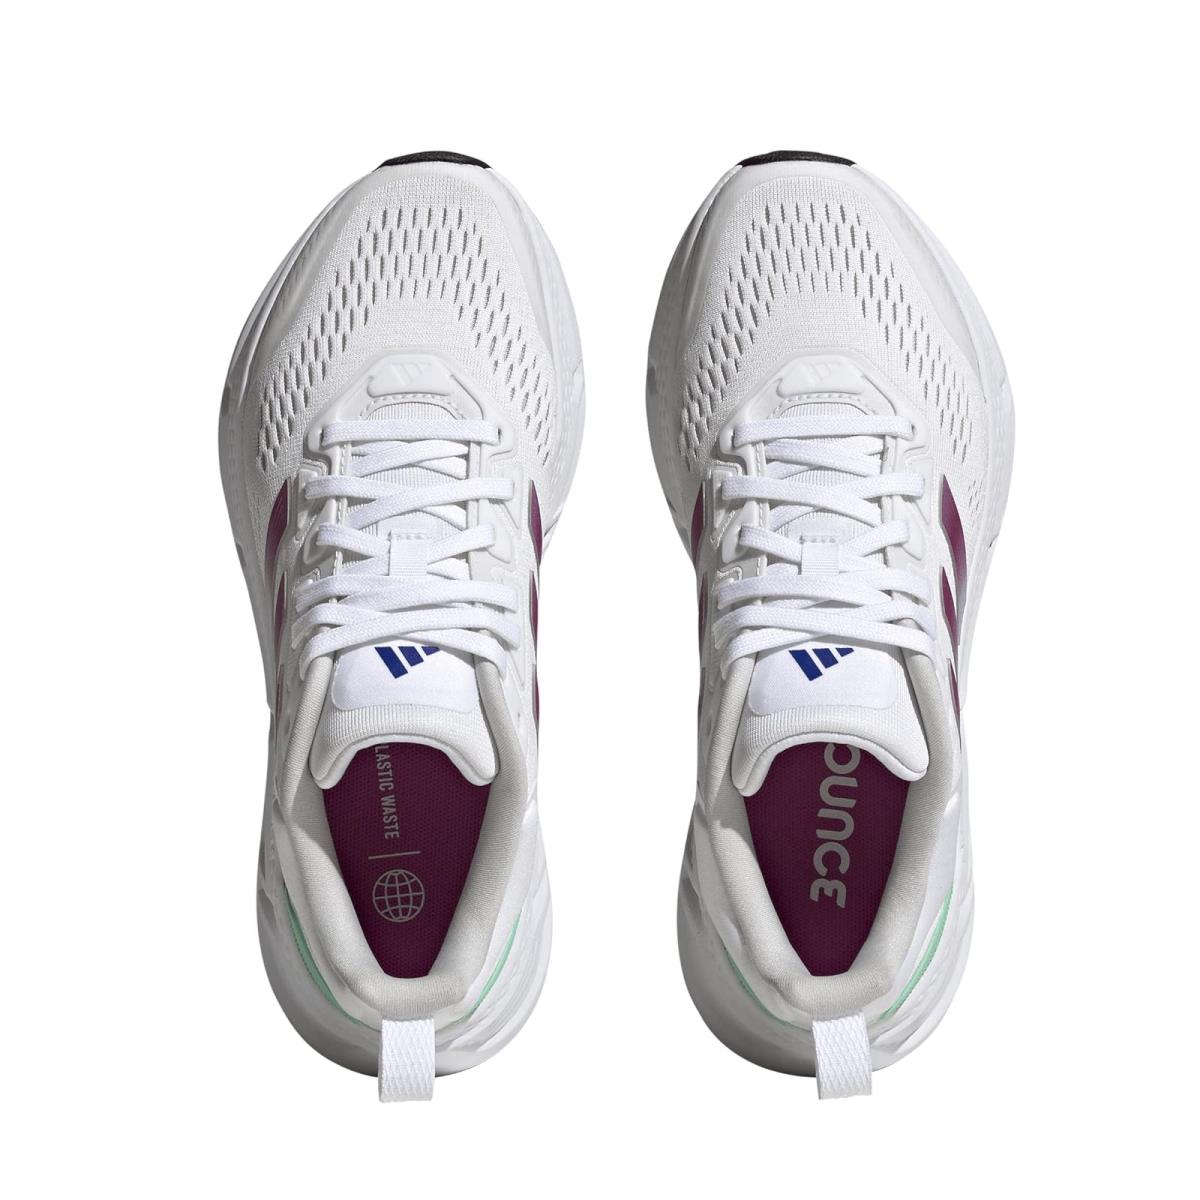 Woman`s Sneakers Athletic Shoes Adidas Running Questar - White/Lucid Fuchsia/Silver Dawn